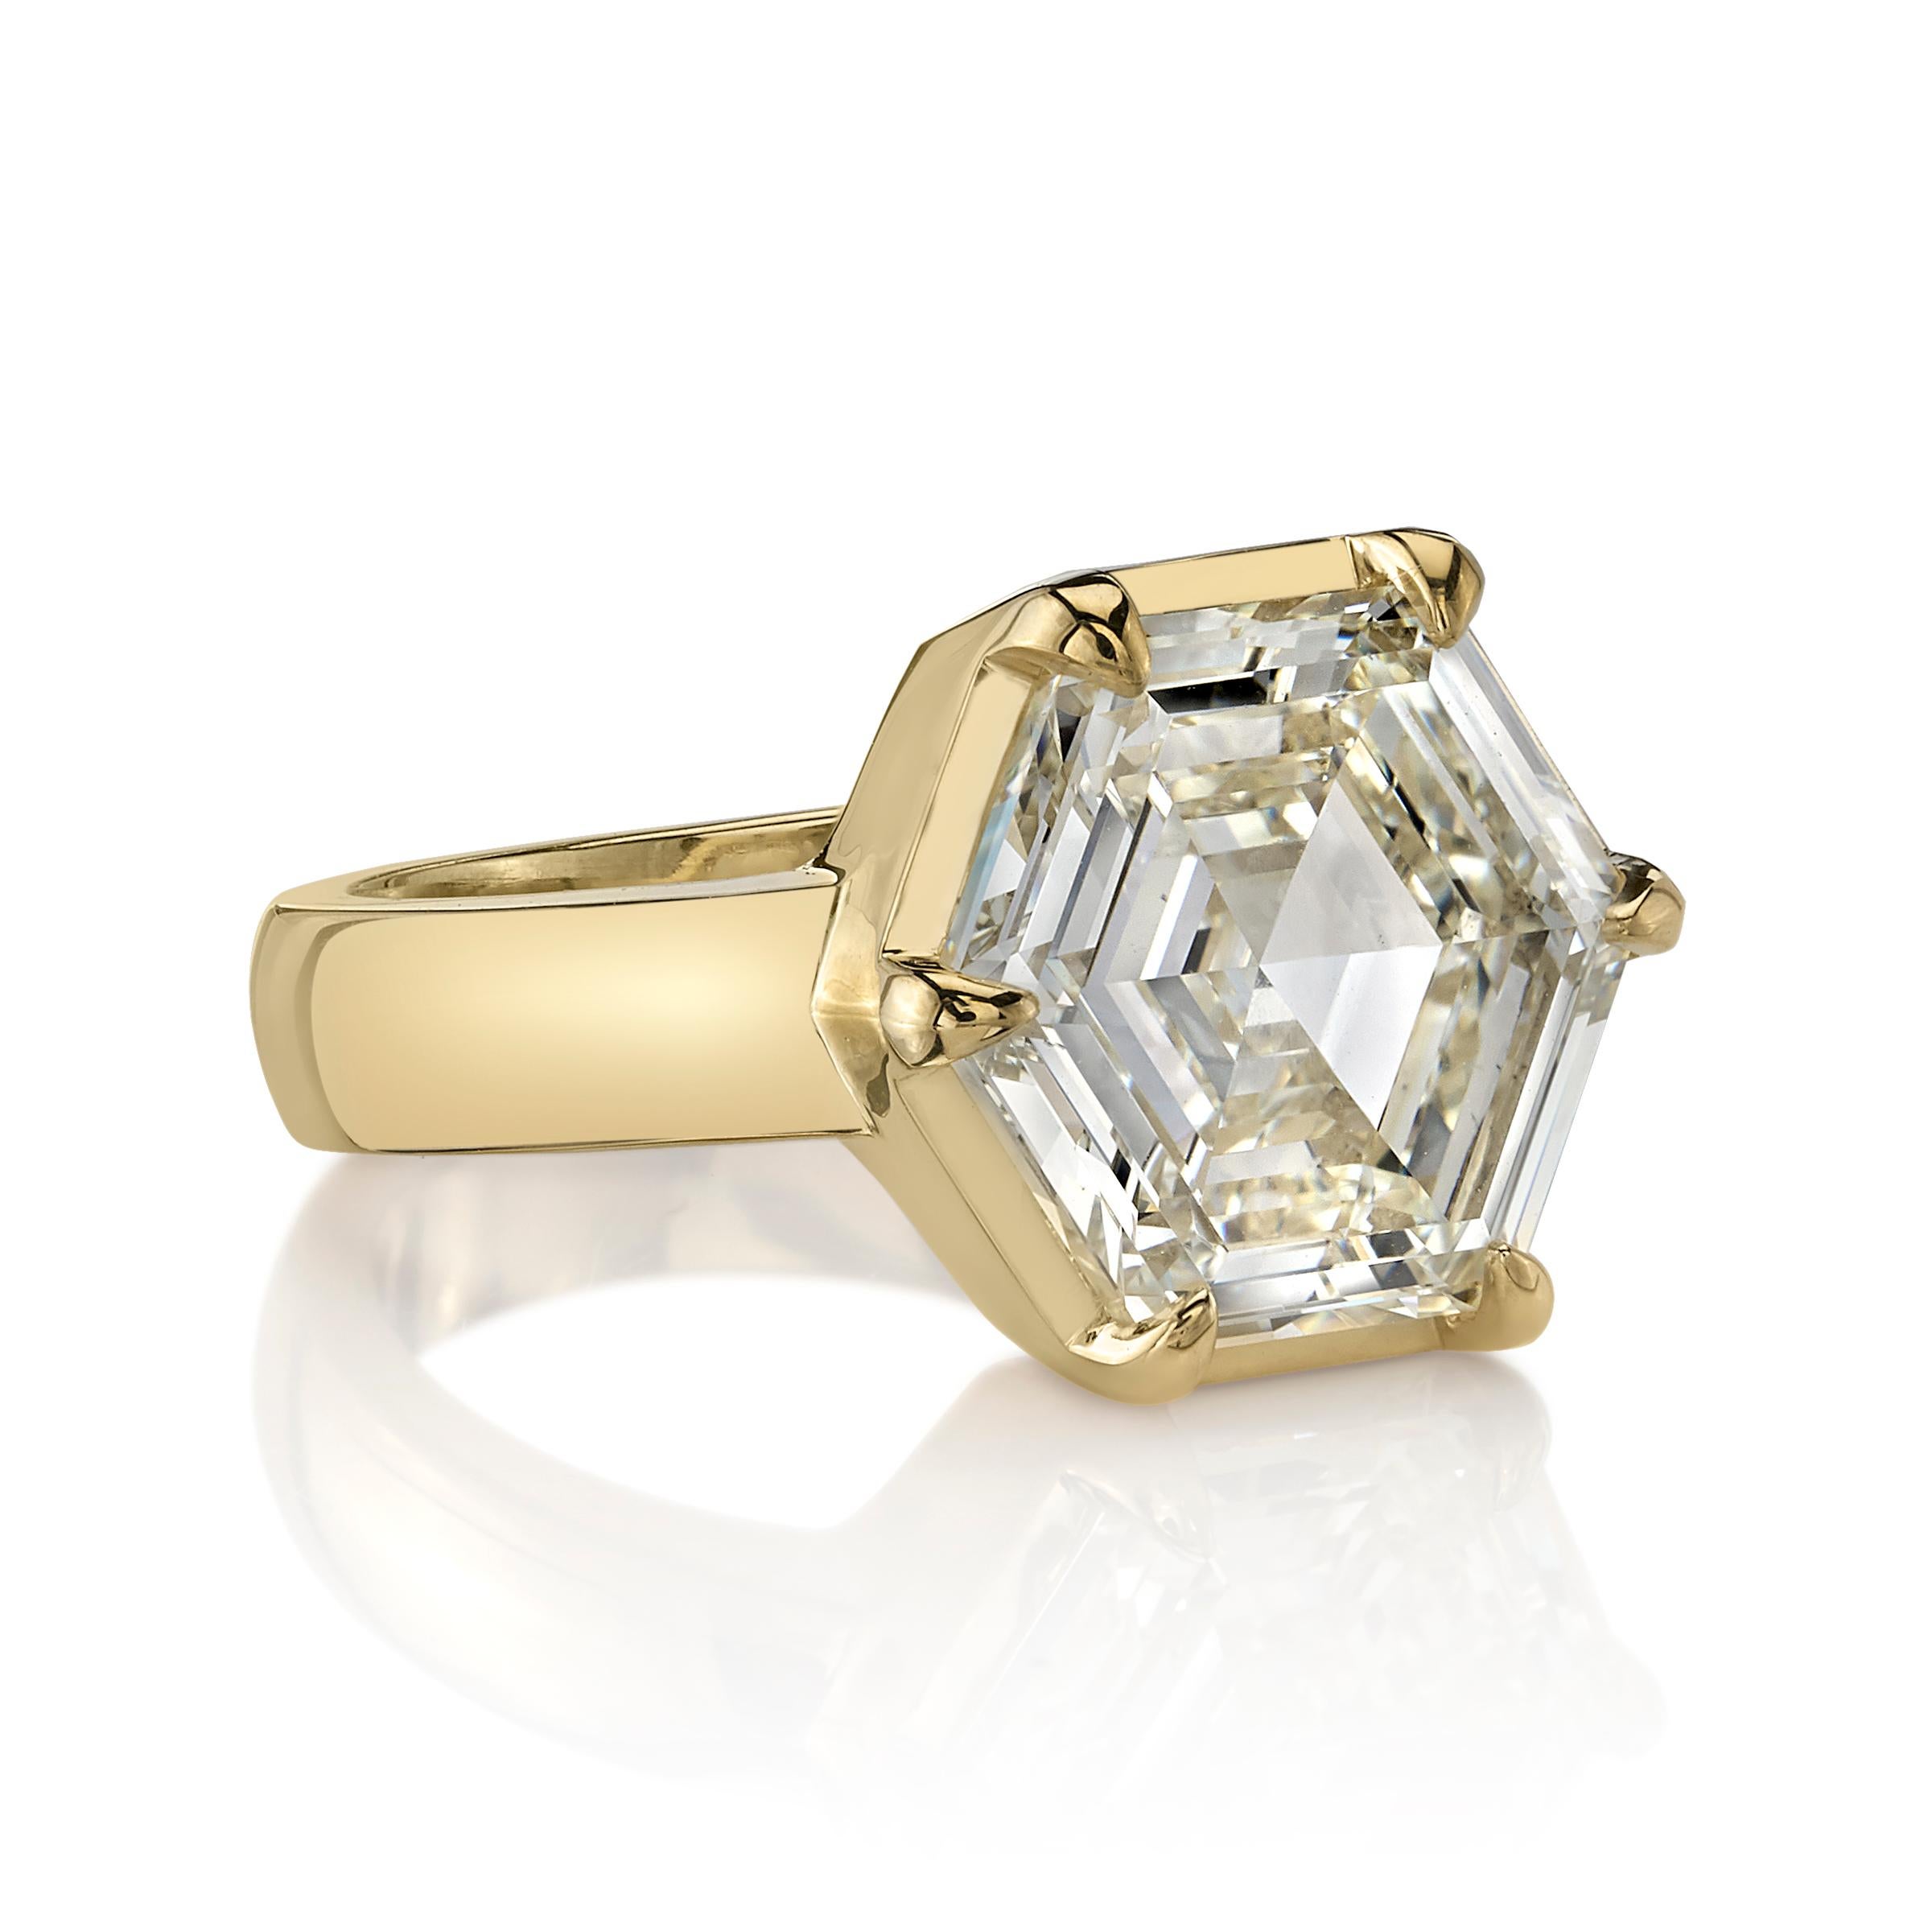 6.03ctw M/VS1 GIA certified Hexagonal step cut diamond set in a handcrafted 18K yellow gold ring.

Ring is currently a size 6 and can be sized to fit. 

Our jewelry is made locally in Los Angeles and most pieces are made to order. For these